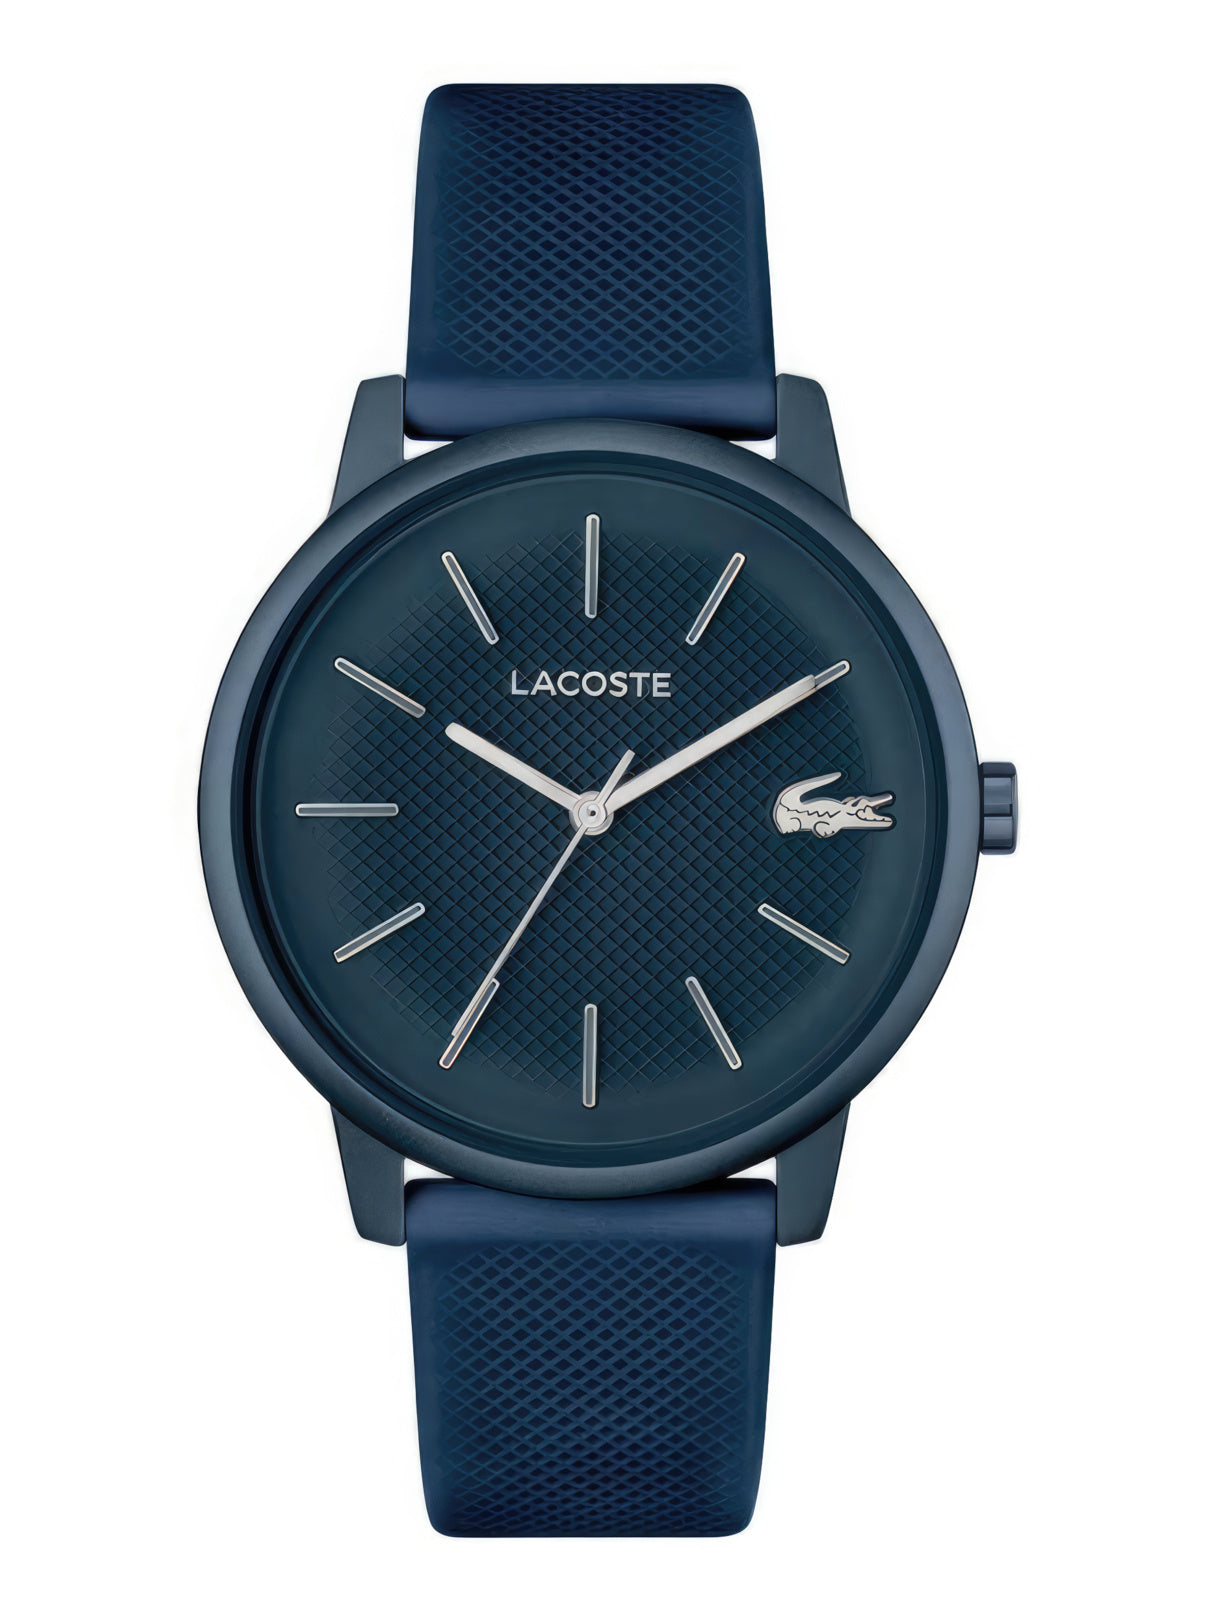 Lacoste Men's Lacoste.12.12 Move Blue Watch 2011241 with a blue silicone strap.